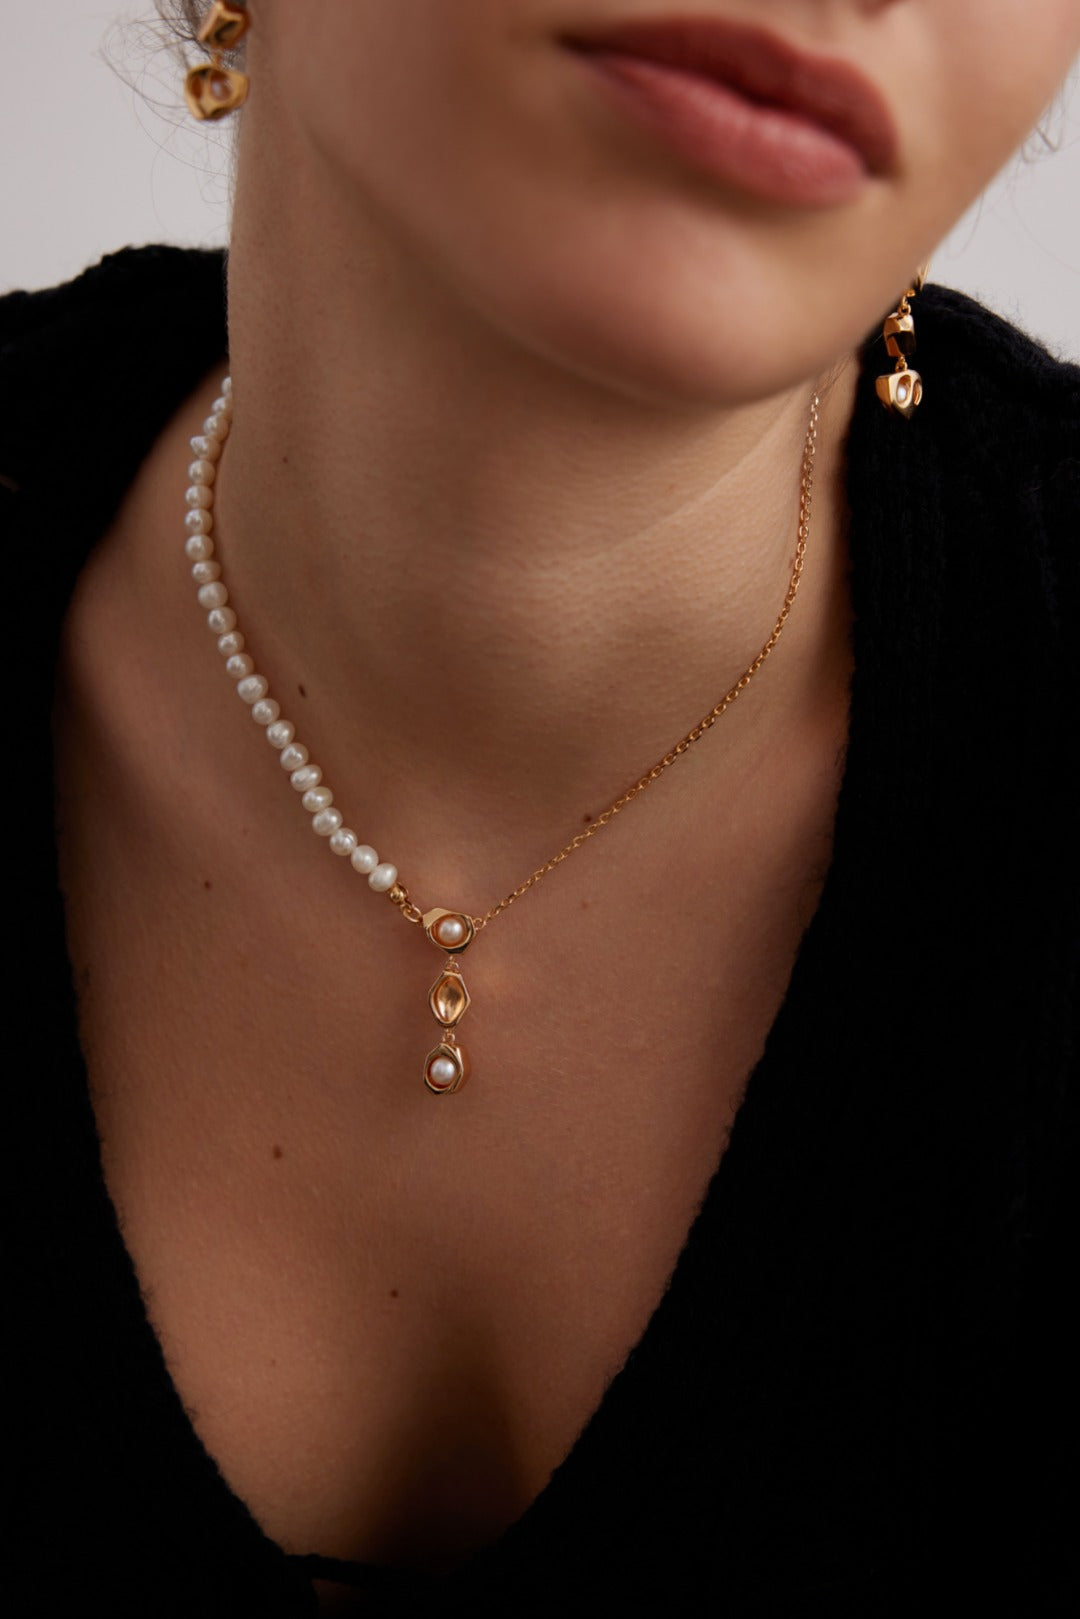 Half Pearls Half Chain Necklace with Dainty Drop Pearl Pendant